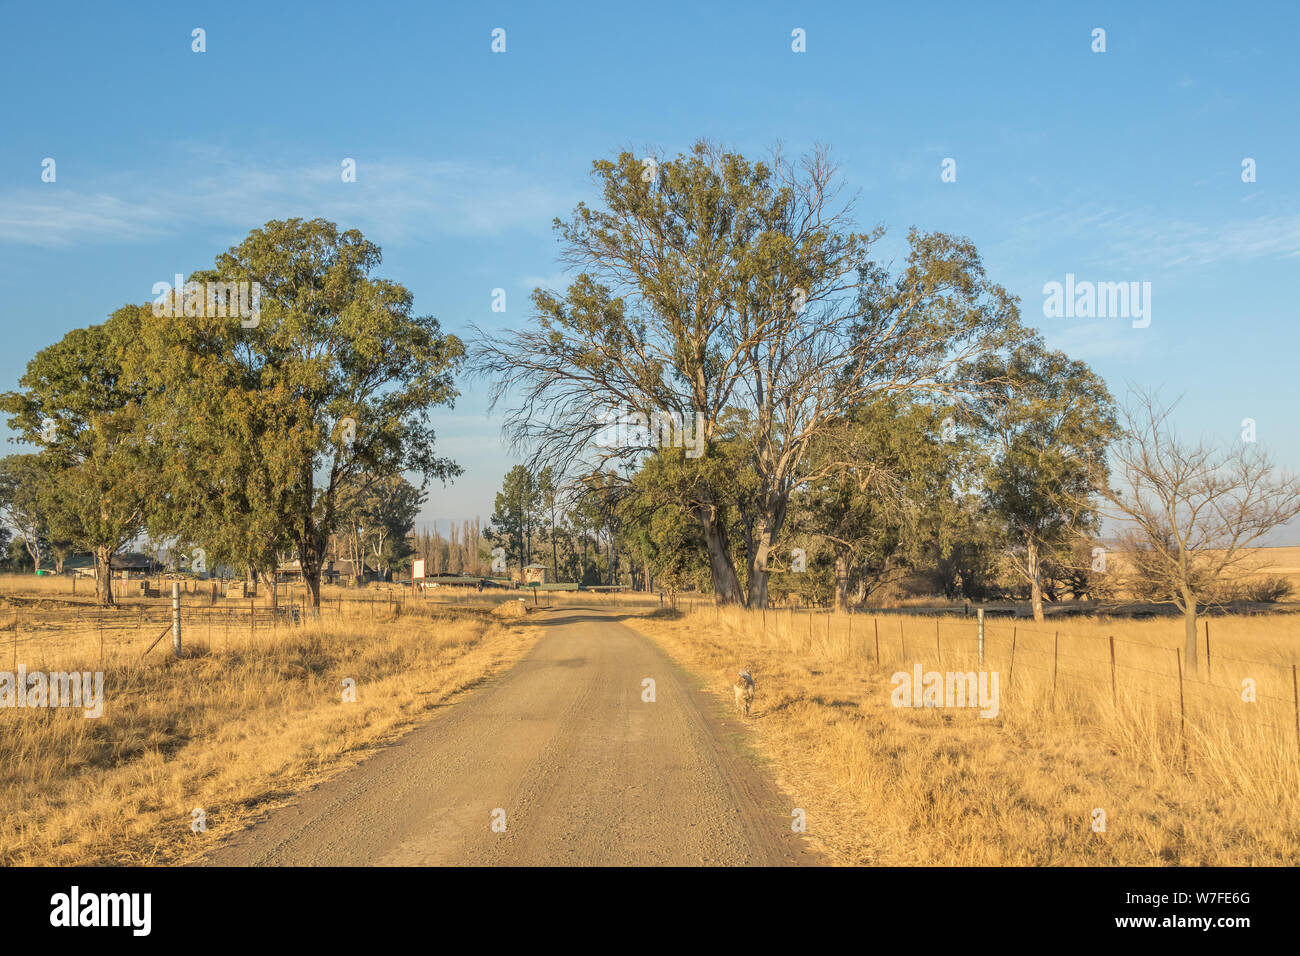 Bergville, South Africa - a dirt road leads to the Dalmore Guest Farm holiday accommodation on a working farm in kwaZulu-Natal province Stock Photo